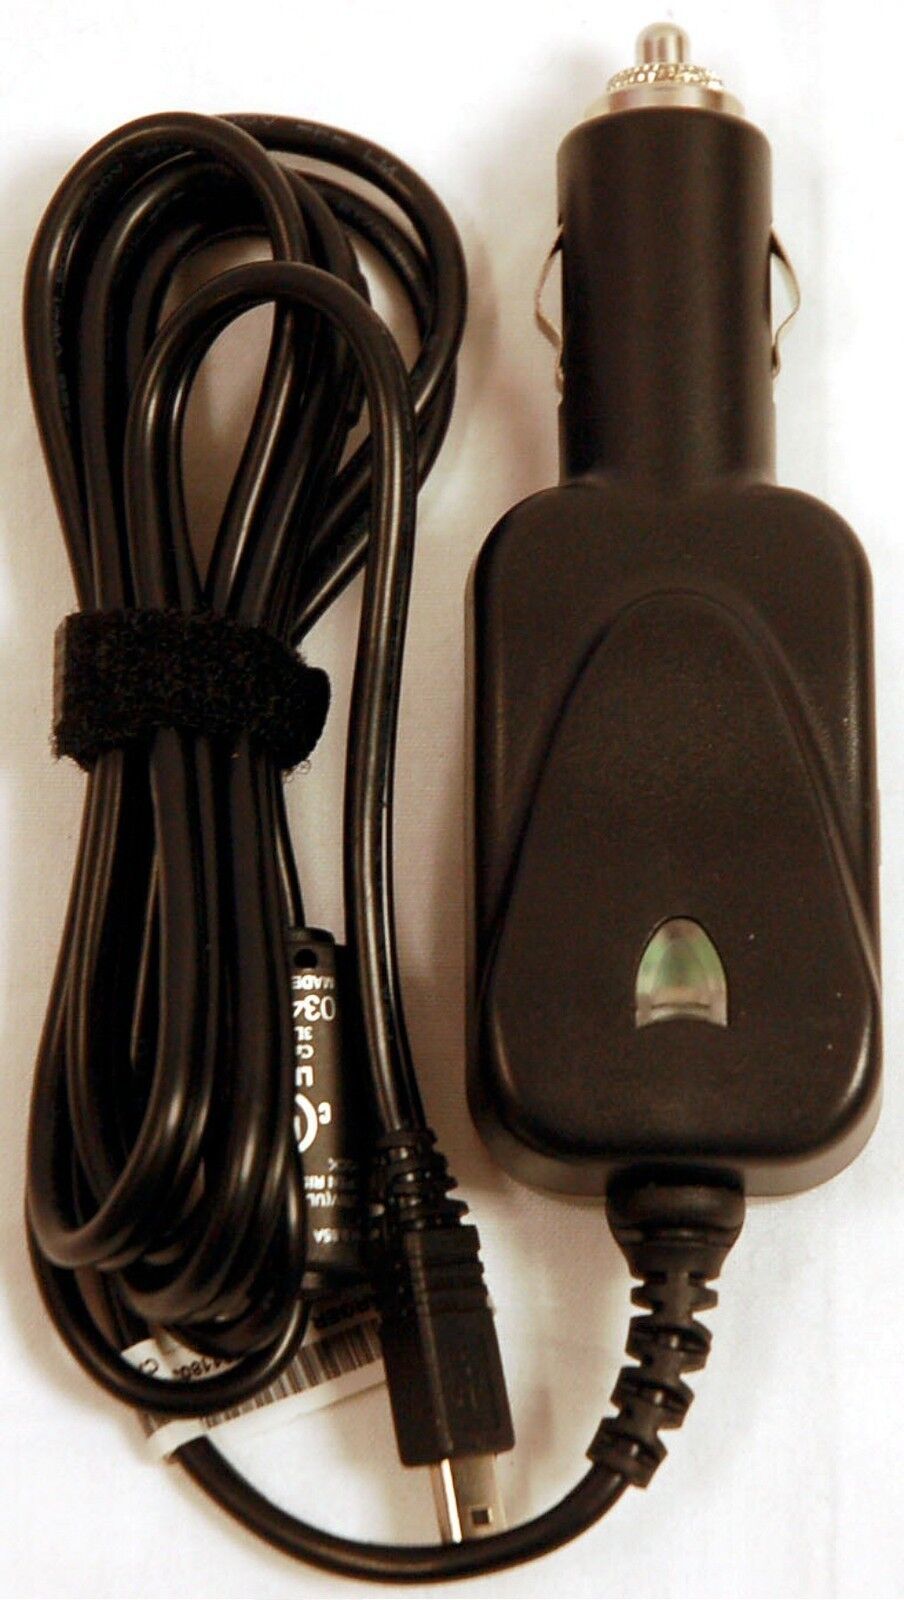 Primary image for NEW GENUINE Garmin Nuvi GPS Mini-USB Car Charger adapter 260W 275T 295W 1100LM